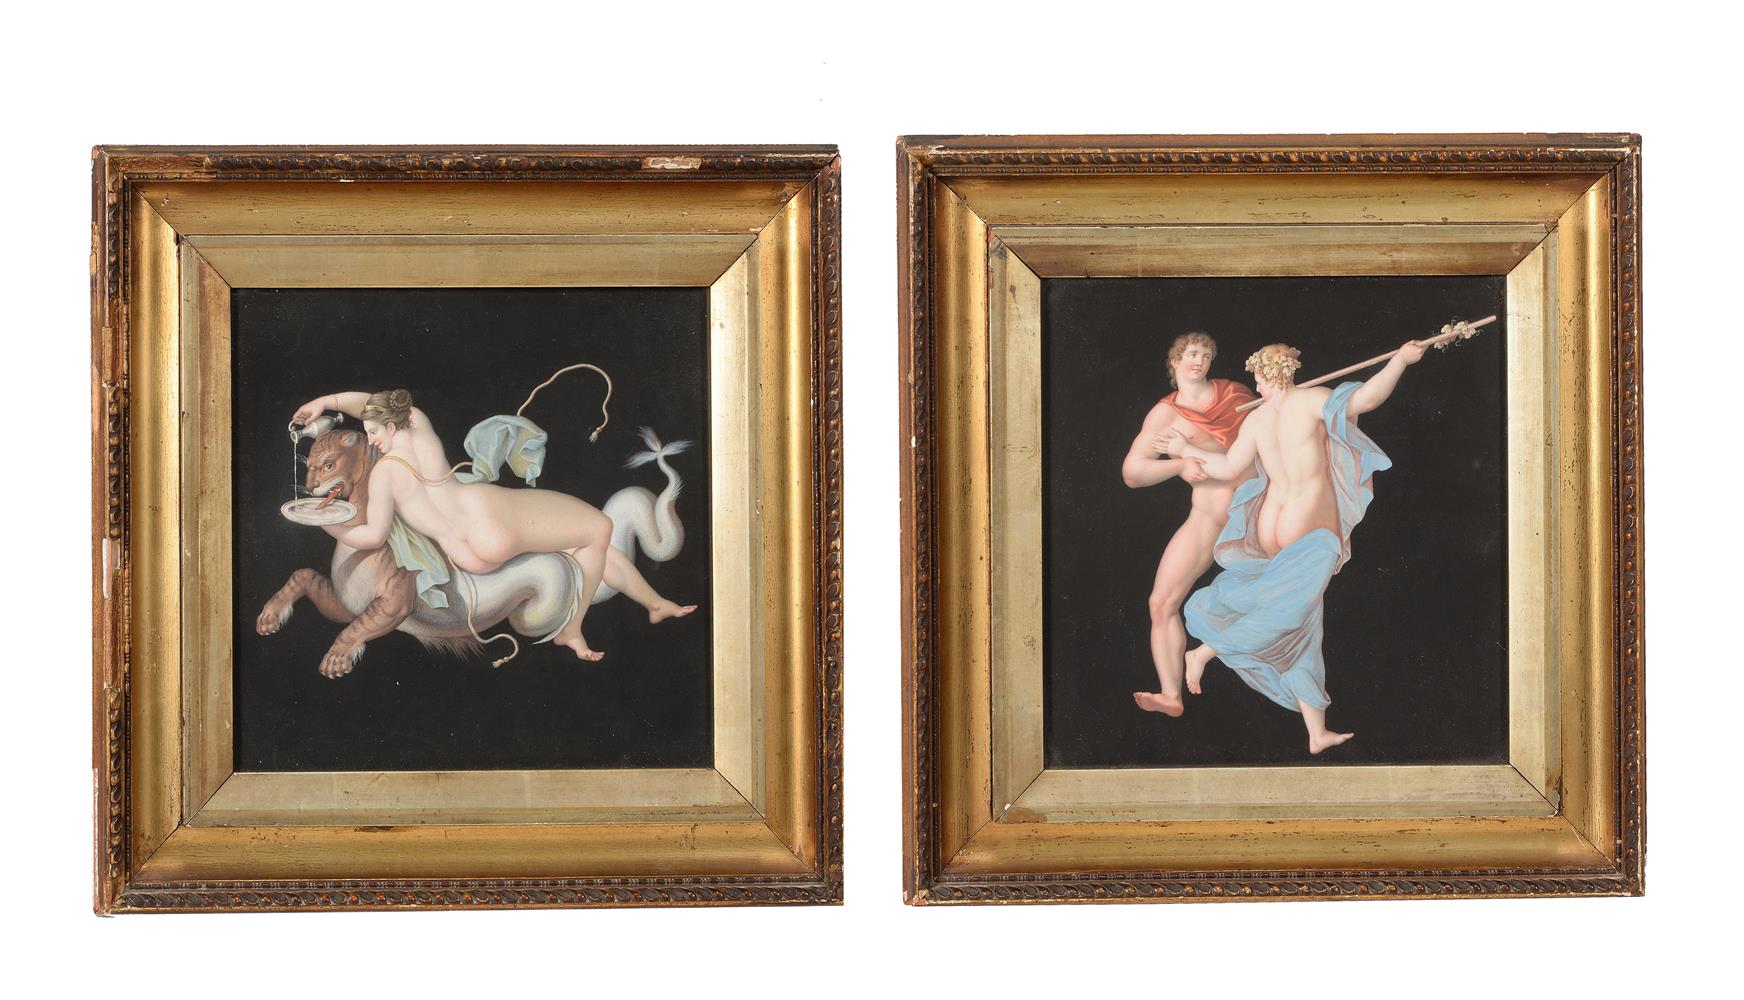 ATTRIBUTED TO THE WORKSHOP OF MICHELANGELO MAESTRI (ITALIAN D. 1812), A PAIR OF GRAND TOUR GOUACHES